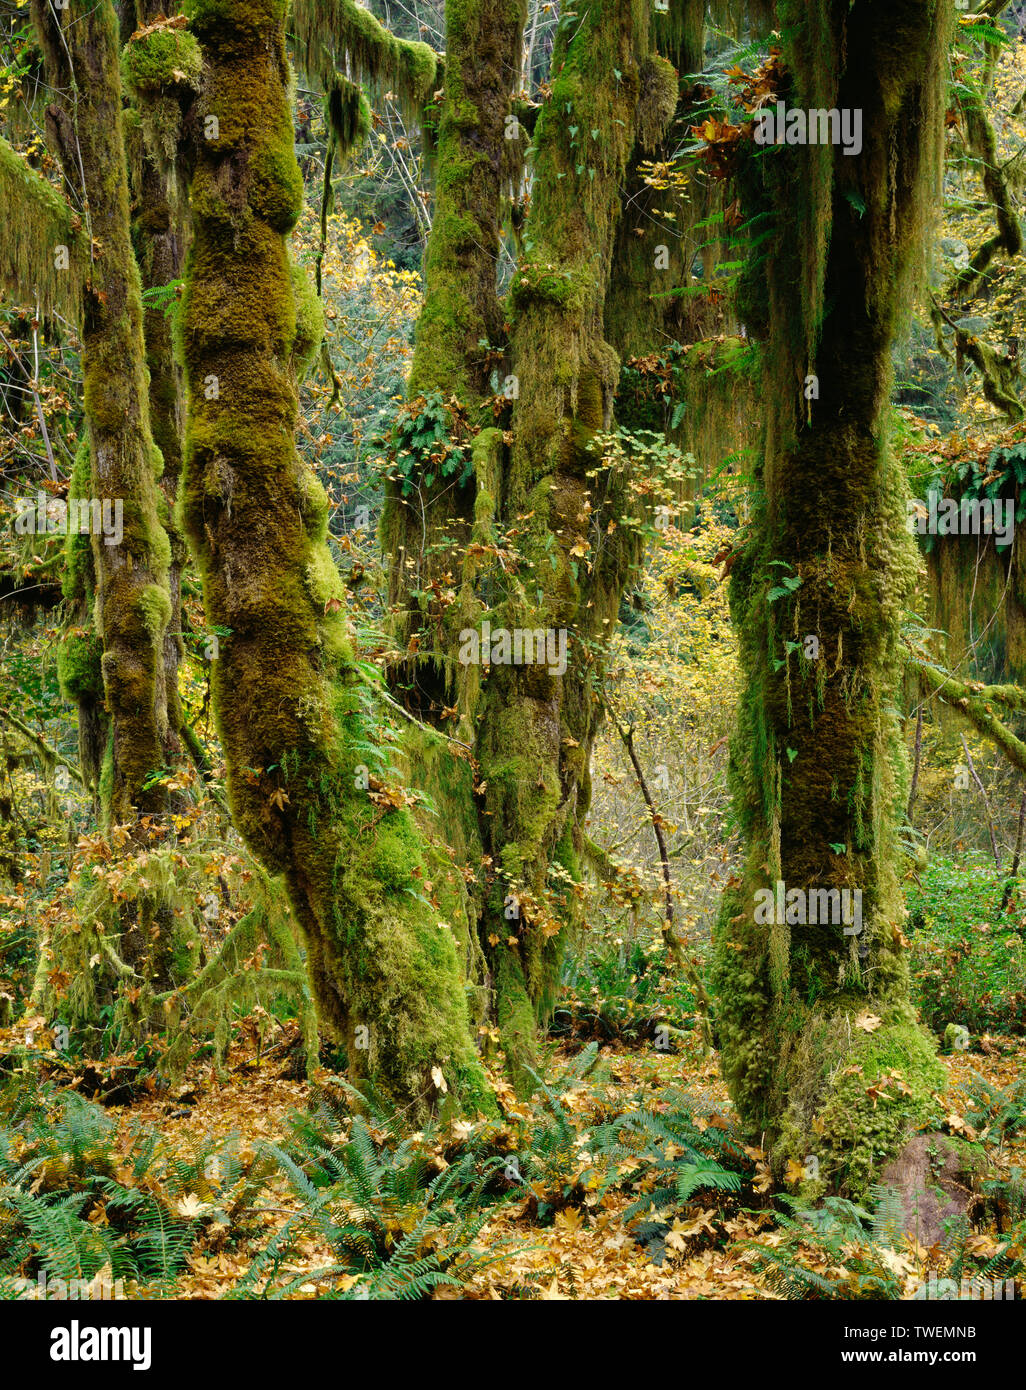 USA, Washington, Olympic National Park, Moss clings to bigleaf maple in autumn; Hoh Rain Forest. Stock Photo